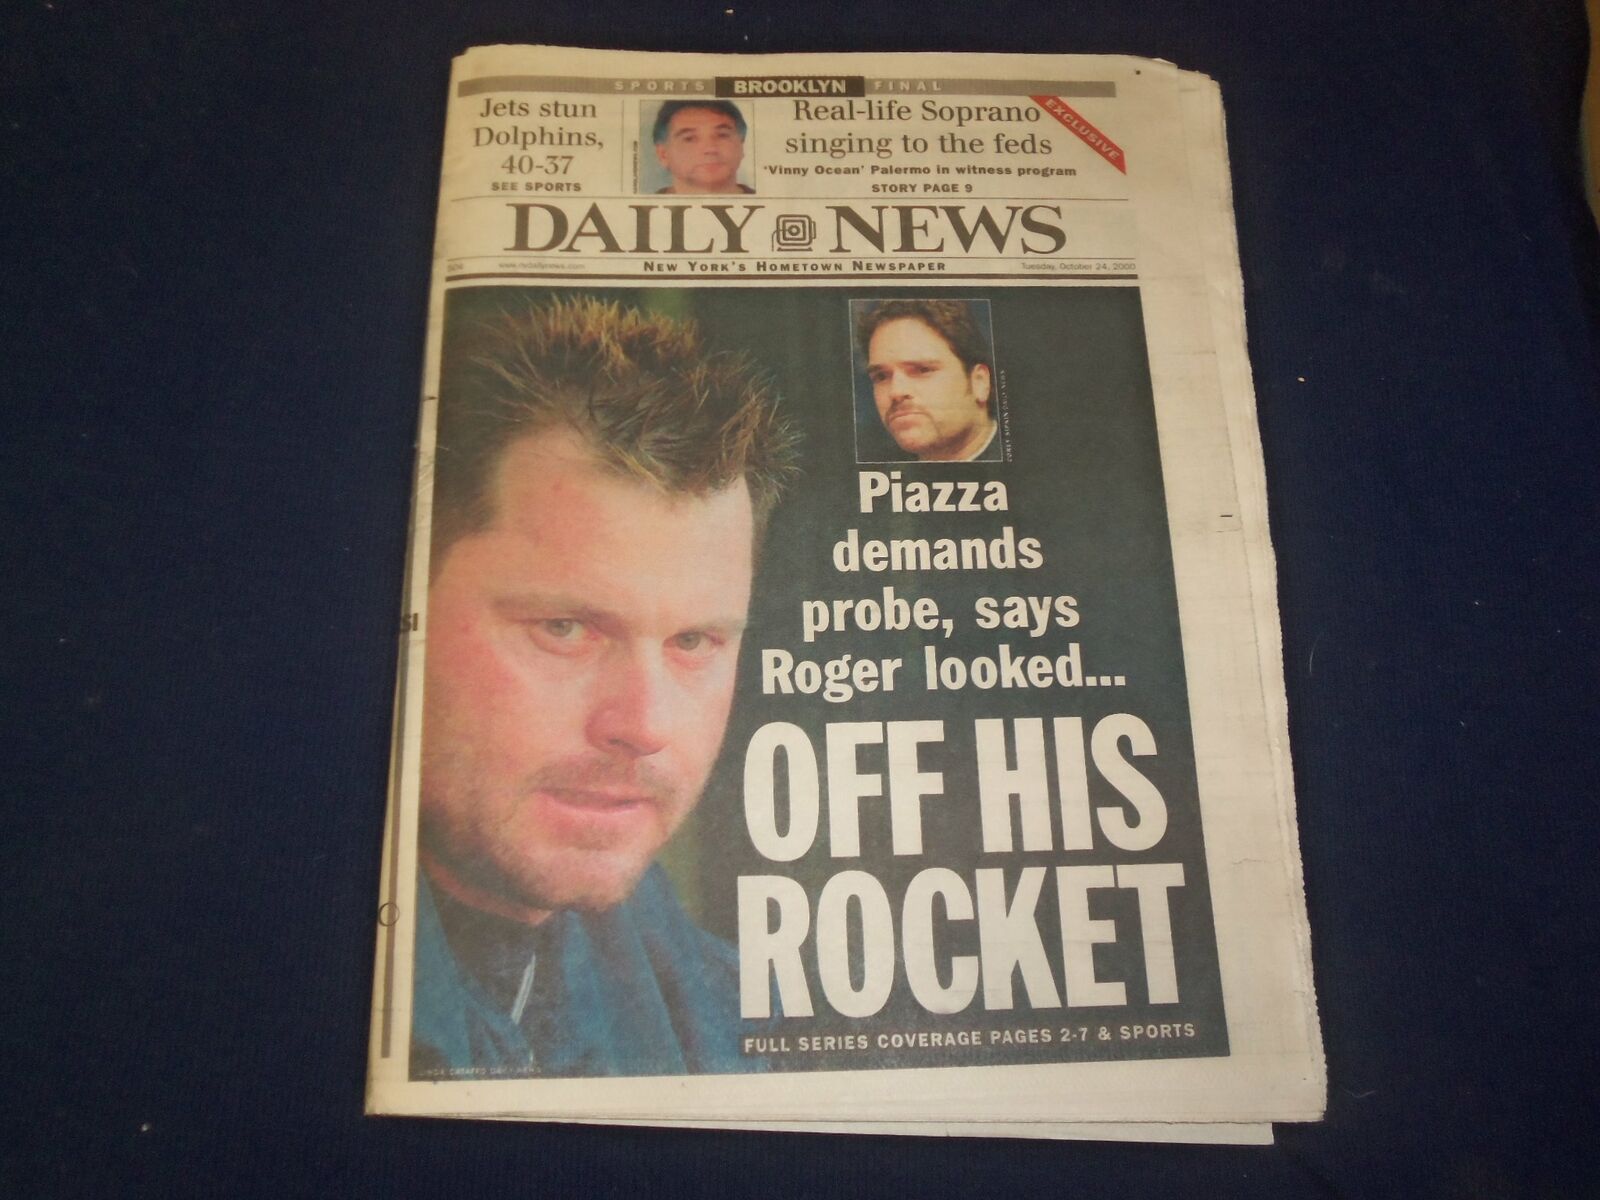 2000 OCT 24 NY DAILY NEWS NEWSPAPER -ROGER CLEMENS THROWS BAT AT PIAZZA- NP 4064